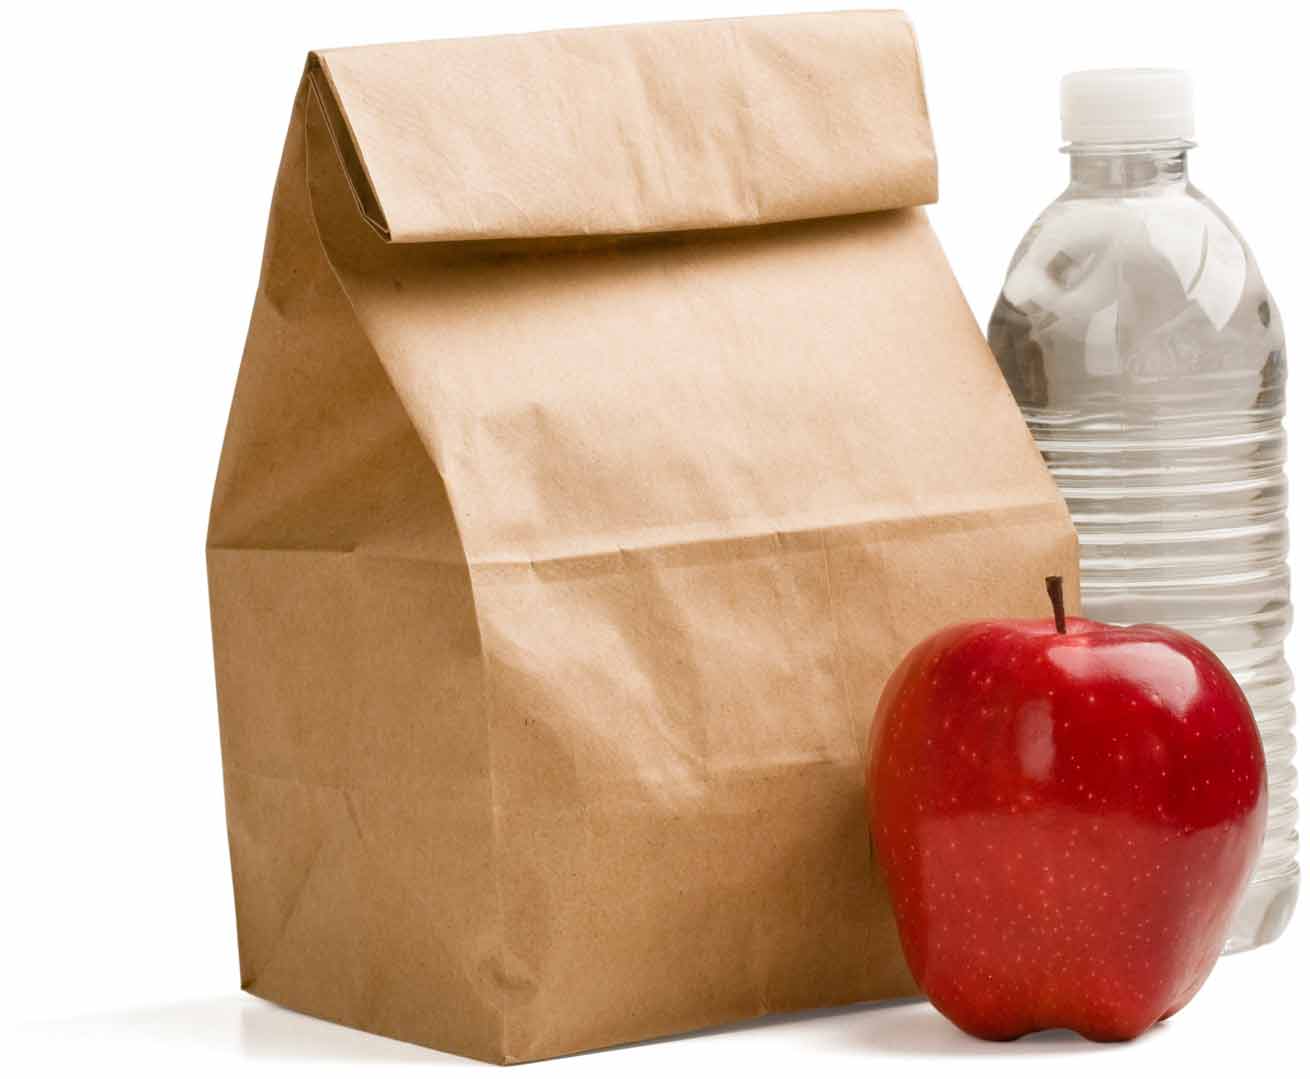 Build Sack Lunches at Home - Covid Crisis - Interfaith in Escondido